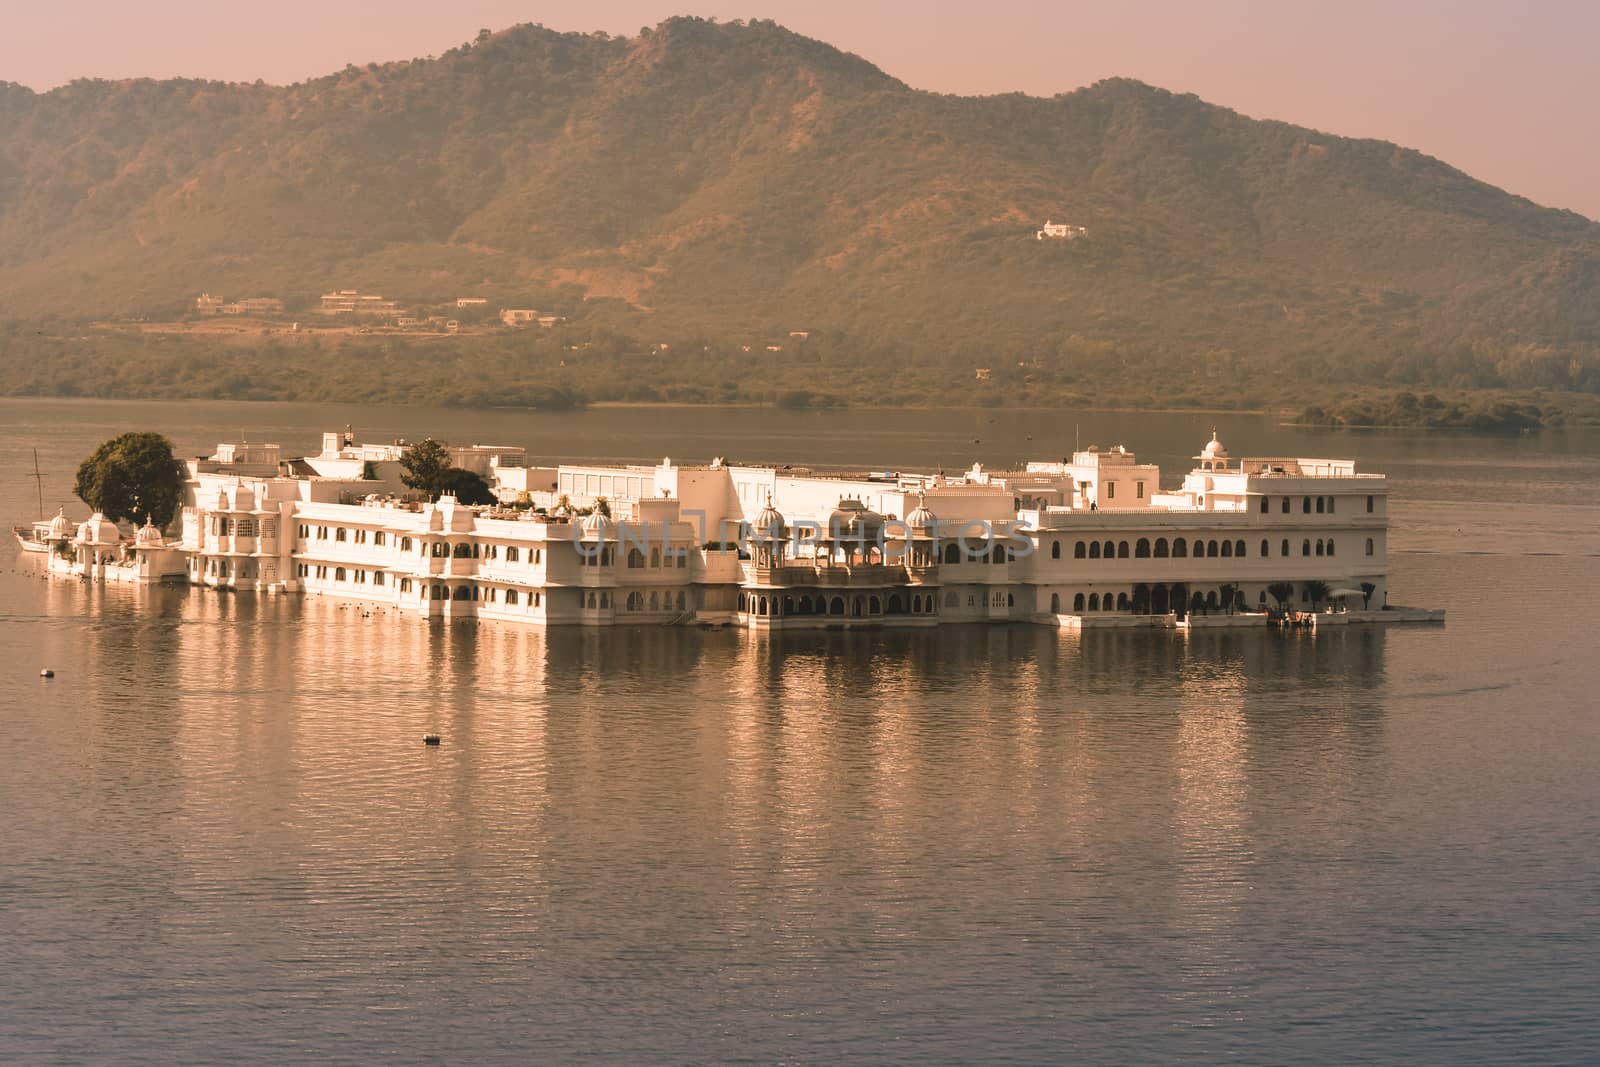 Tranquil view of reflection on water of "JAL MAHAL", famous historical architectural palace of Jaipur City, Rajasthan, India, Asia